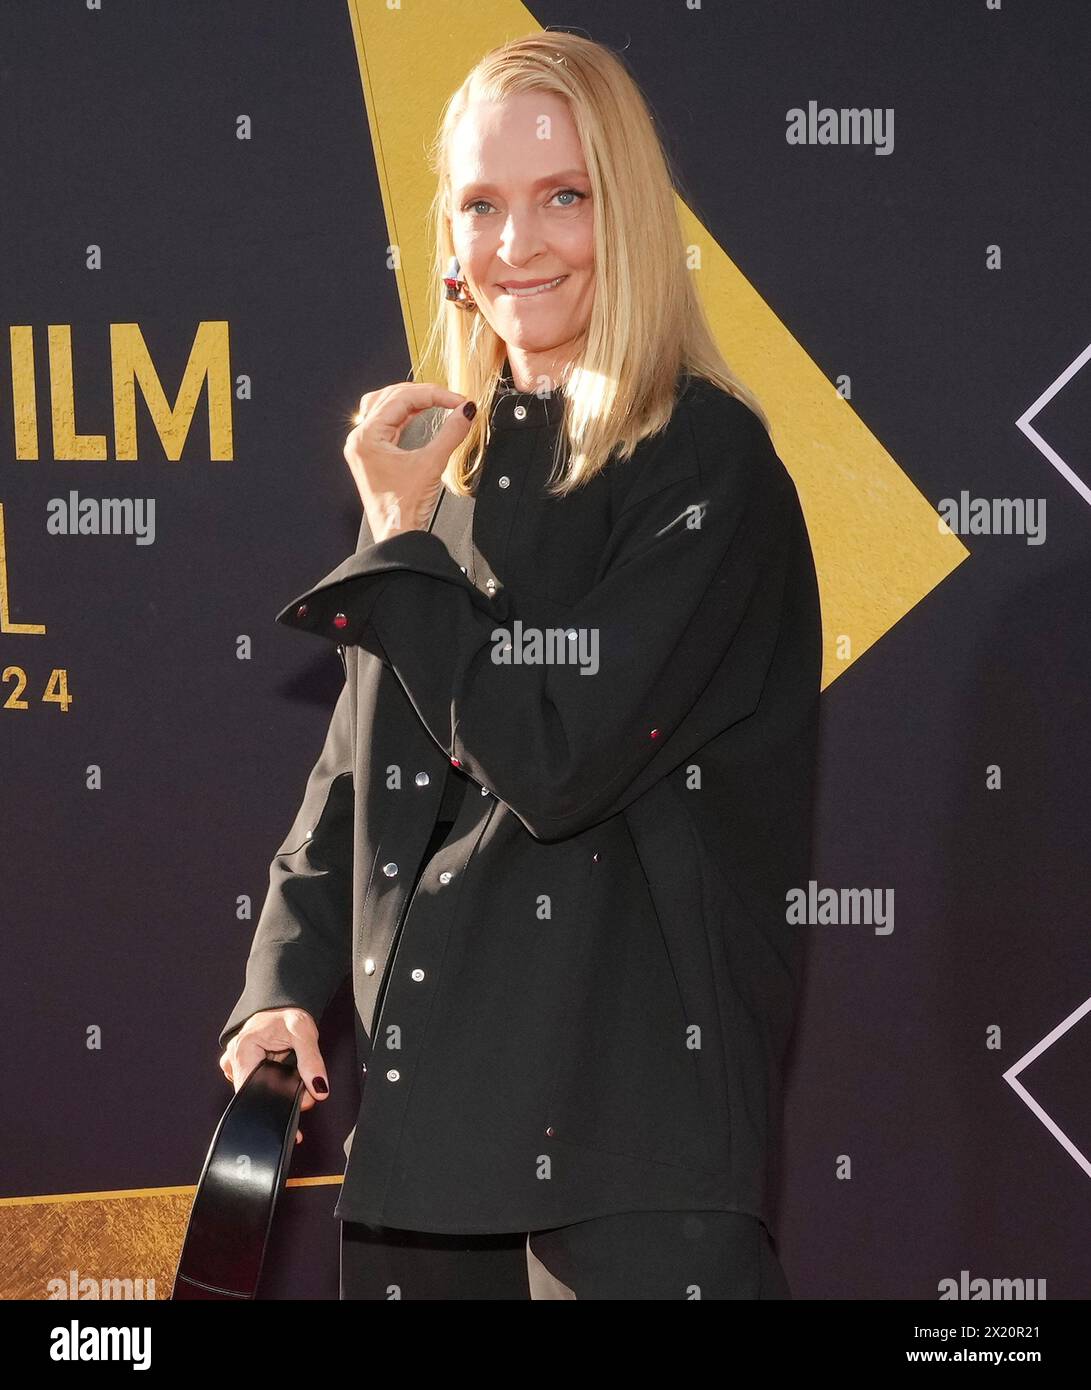 Los Angeles, USA. 18th Apr, 2024. Uma Thurman arrives at the 2024 TCM Classic Film Festival Opening Night of PULP FICTION held at the TCL Chinese Theatre in Hollywood, CA on Thursday, ?April 18, 2024. (Photo By Sthanlee B. Mirador/Sipa USA) Credit: Sipa USA/Alamy Live News Stock Photo